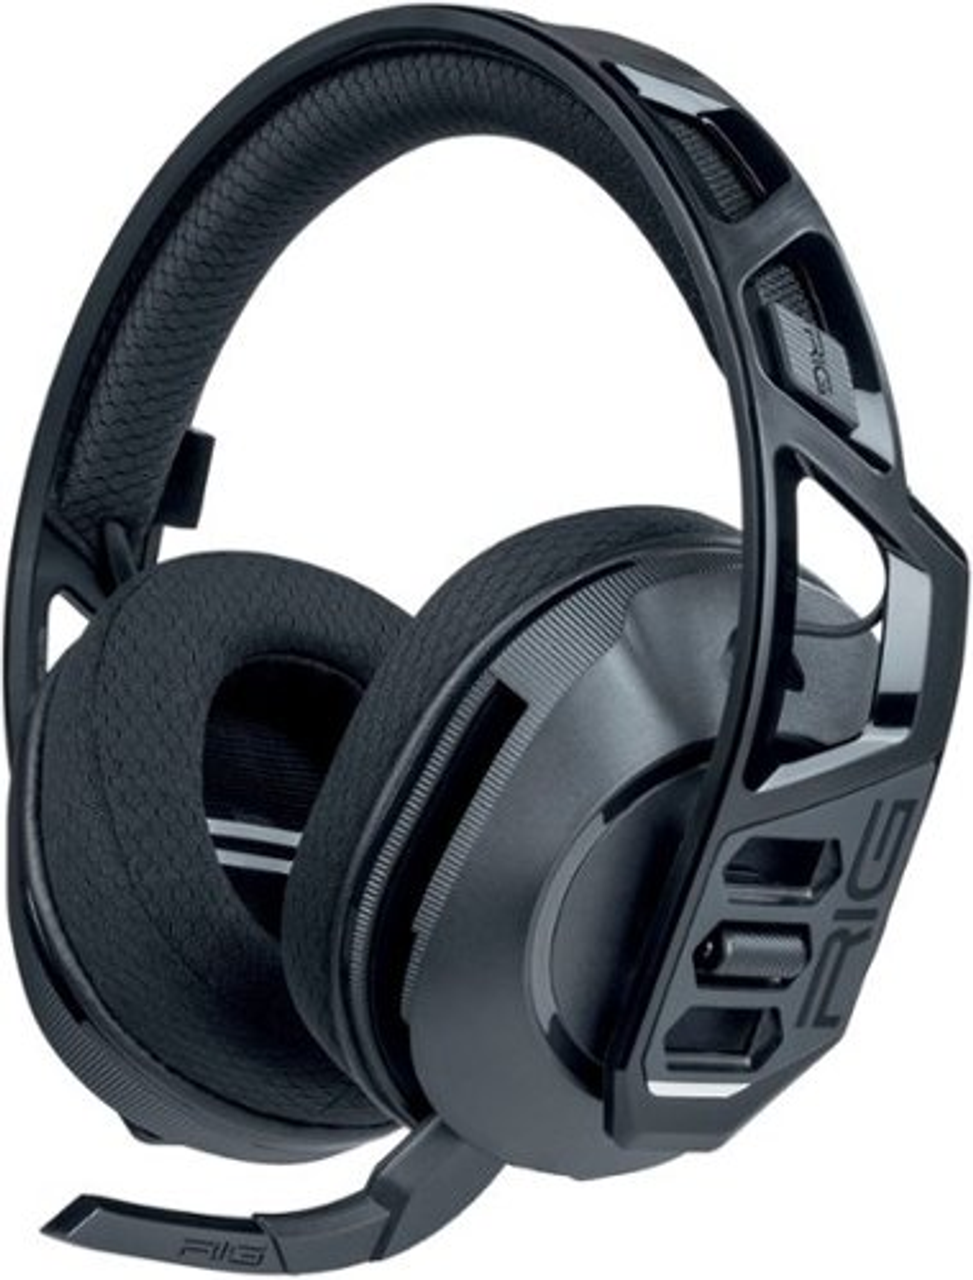 RIG - 600 Pro HX Wireless Over-the-Ear Gaming Headset - Black